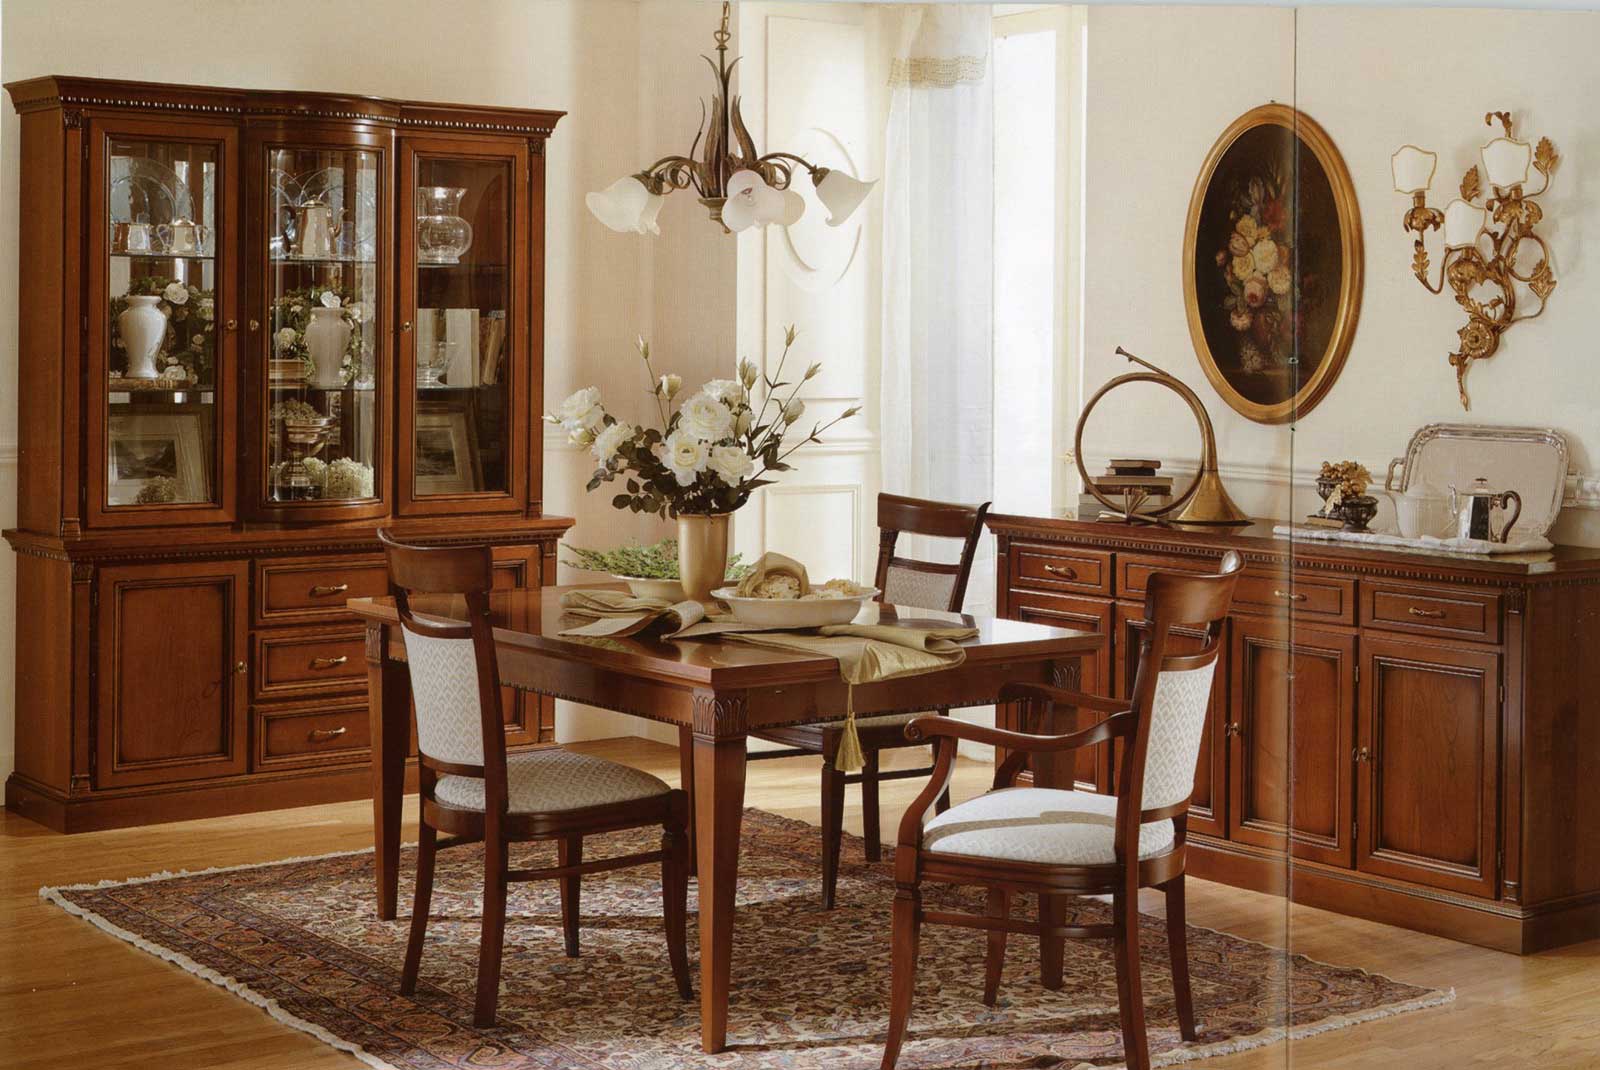 Modern Brown Room Amazing Modern Brown Wooden Dining Room Chairs With Classic Quadrangle Dining Room Table Design Plus Awesome Pendant Lamp Decorating Also Modern Fur Rug Dining Room Design Dining Room Wooden Stylish Of Dining Room Chairs